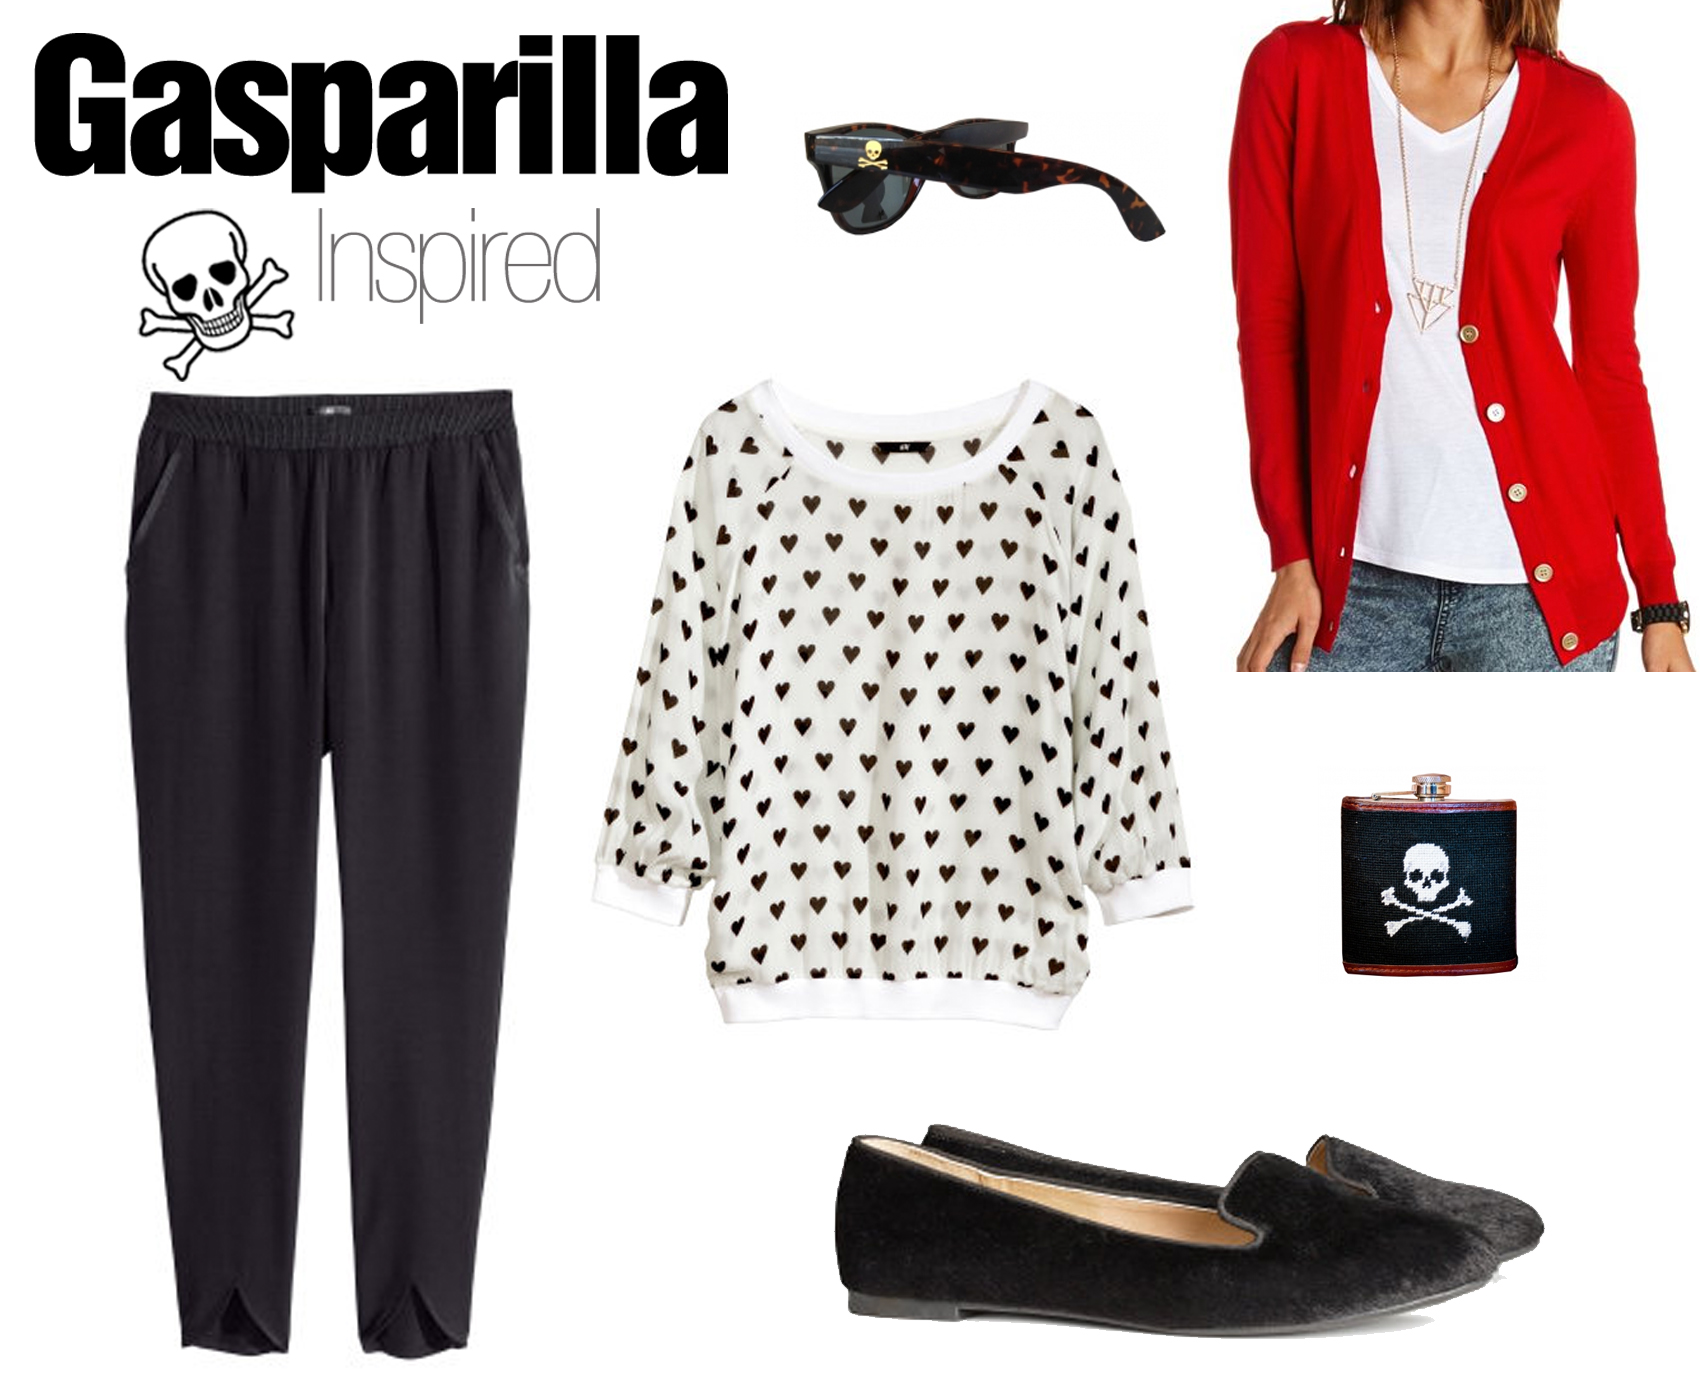 Gasparilla Inspired Outfit